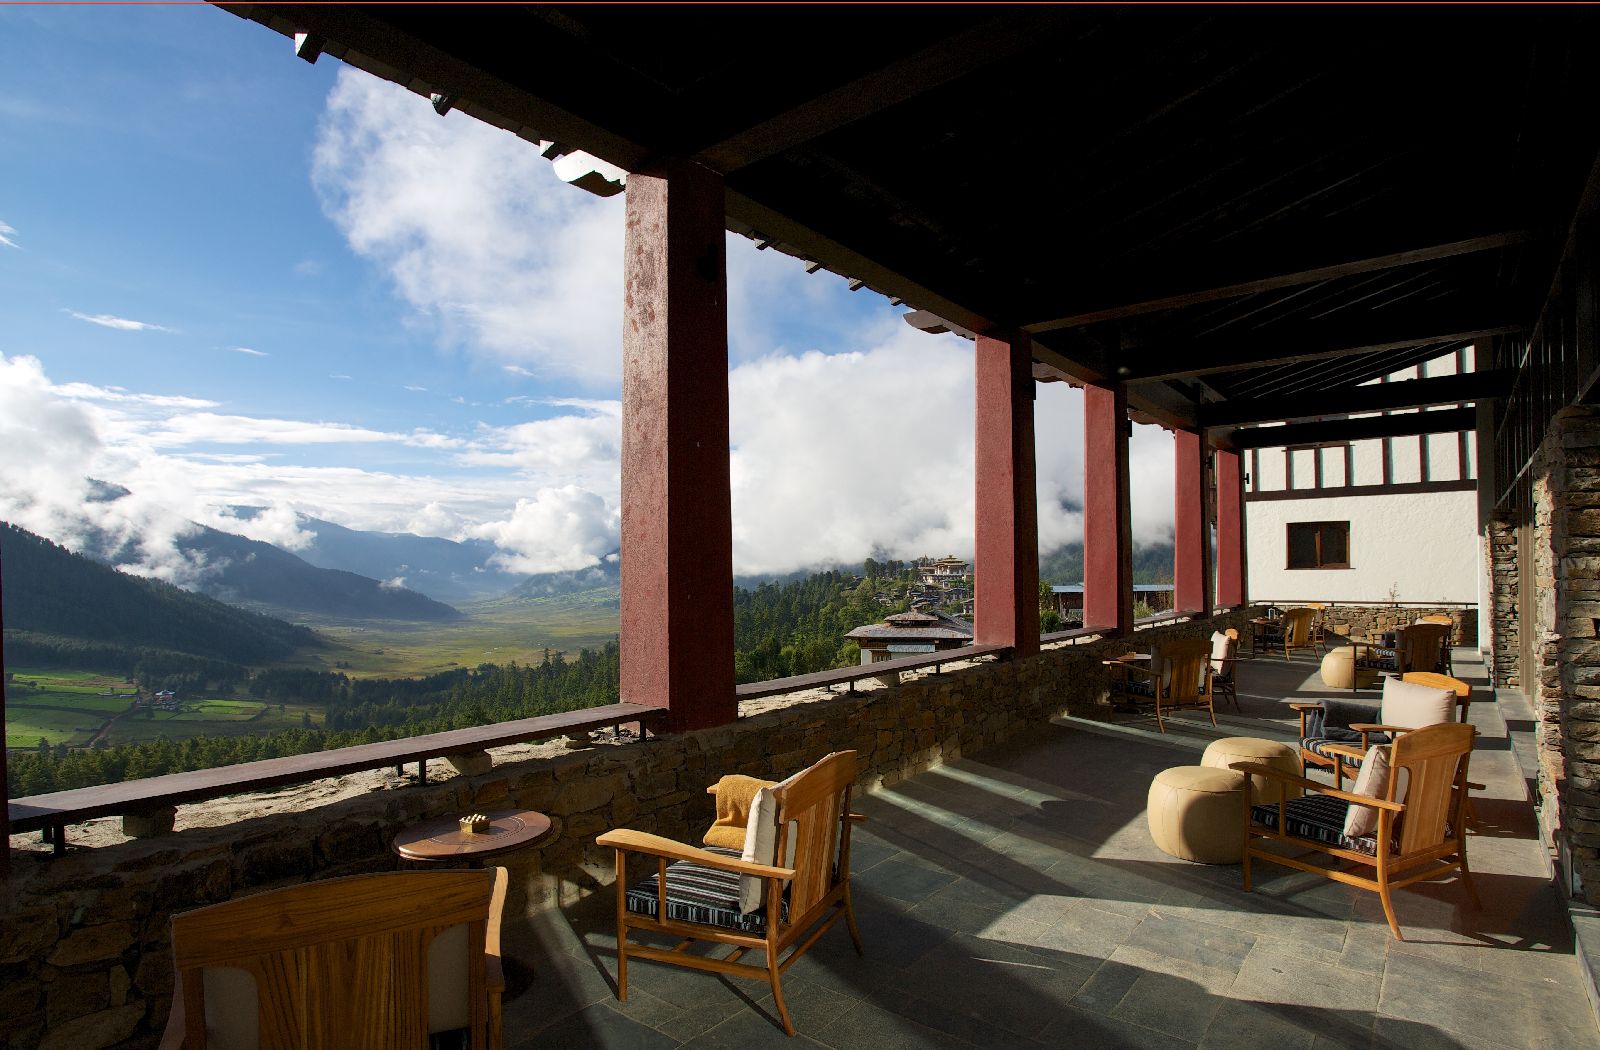 Panoramic views from the terrace at Gangtey Lodge in Bhutan